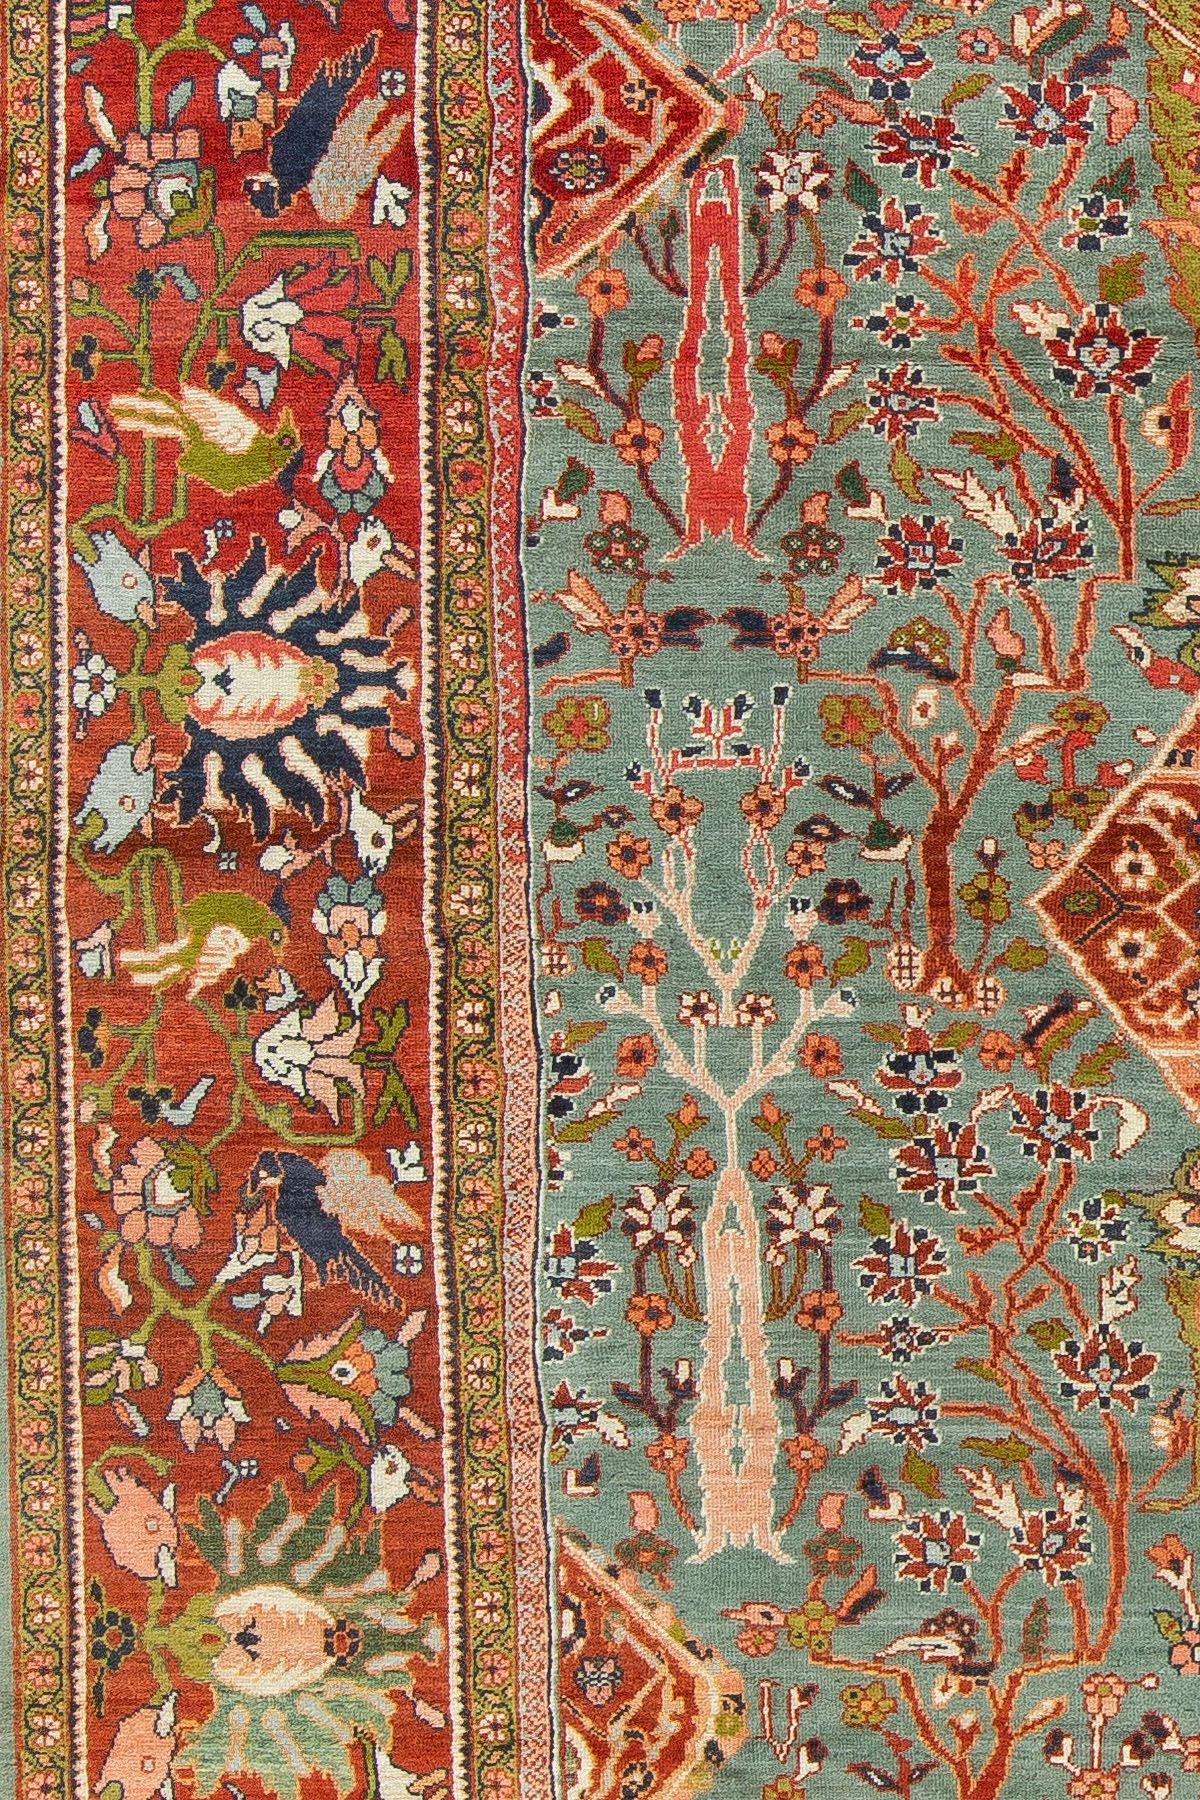 Fine quality Persian Ferehan Paradise motif teal color room size rug from the early 20th century

Measures: 8'7” x 11'8”.